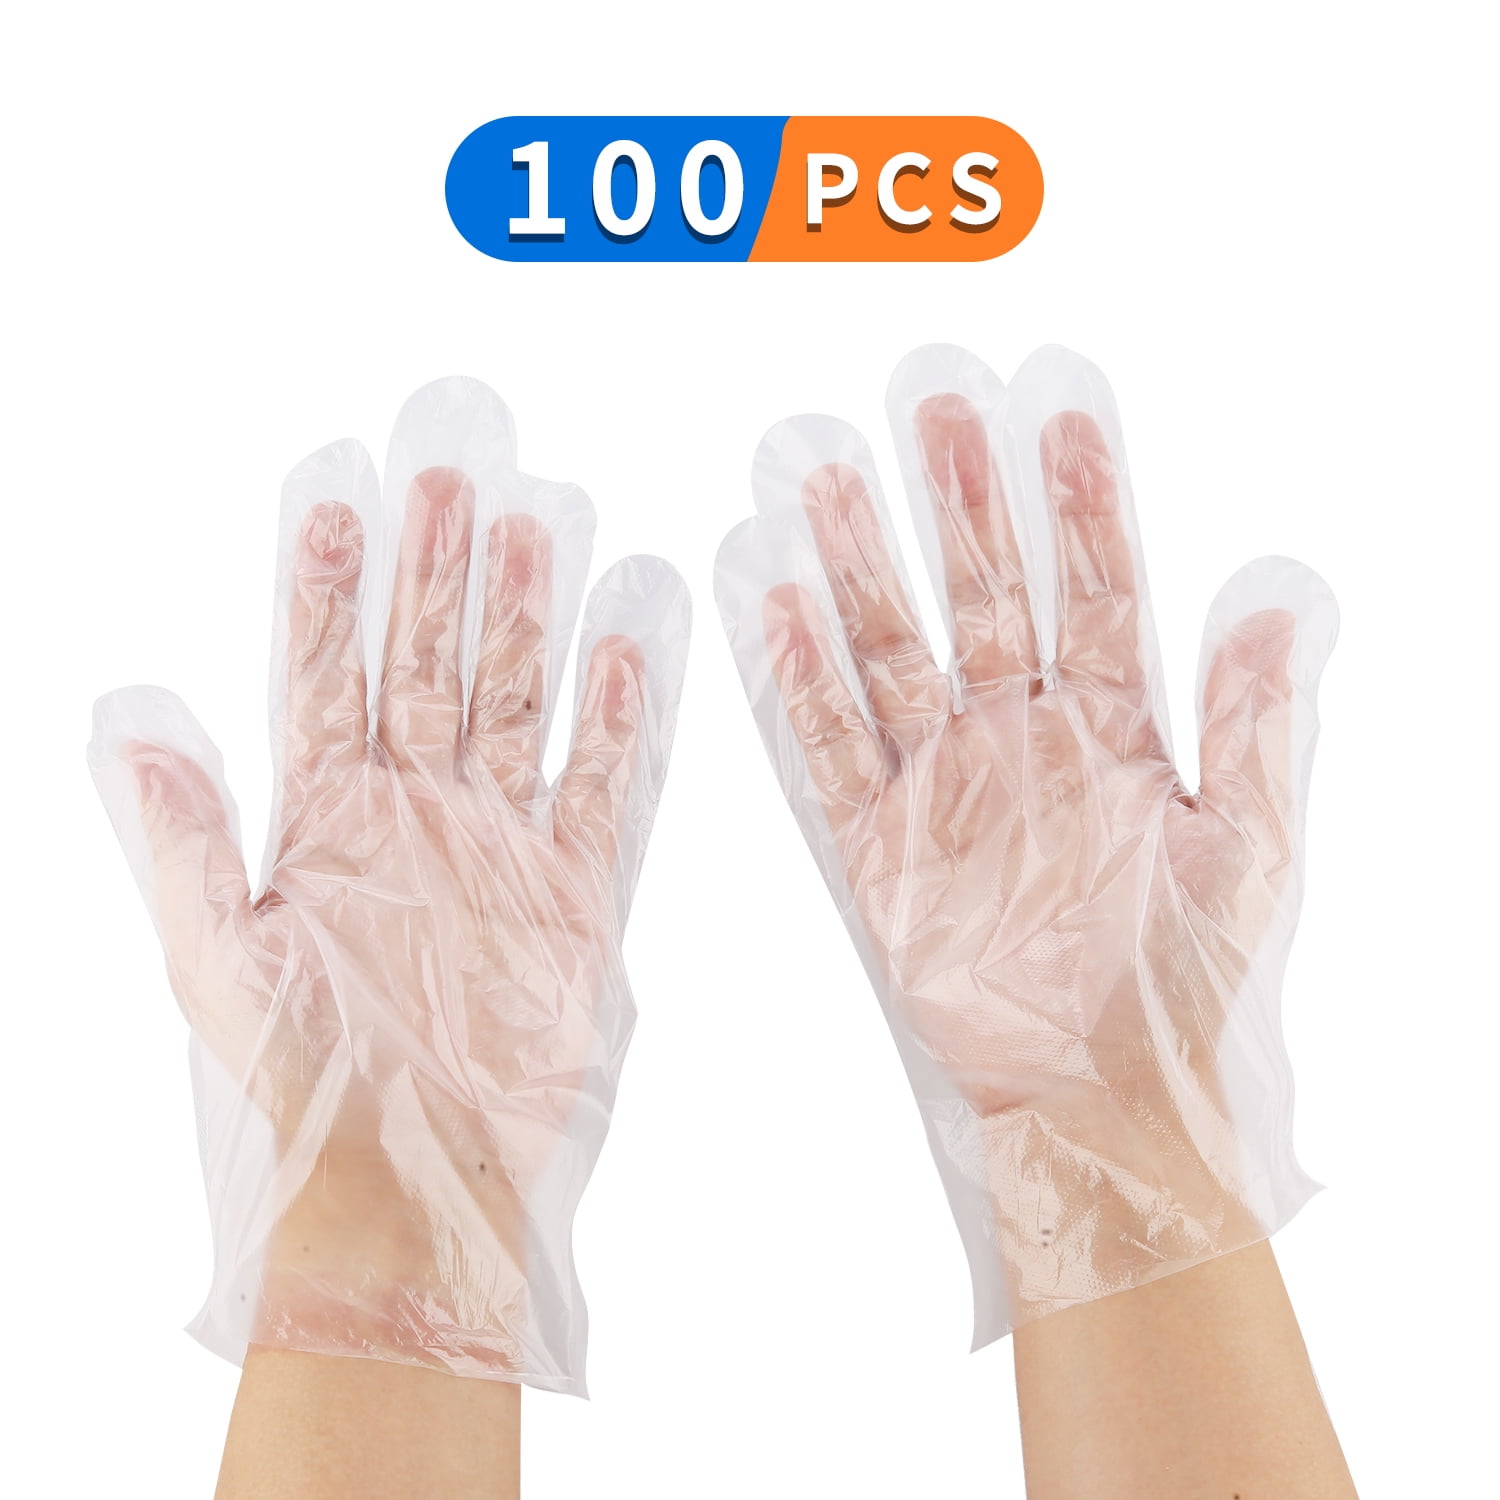 100xPolythene Plastic Disposable Gloves Clean Car Catering Food Safe Hygiene S 